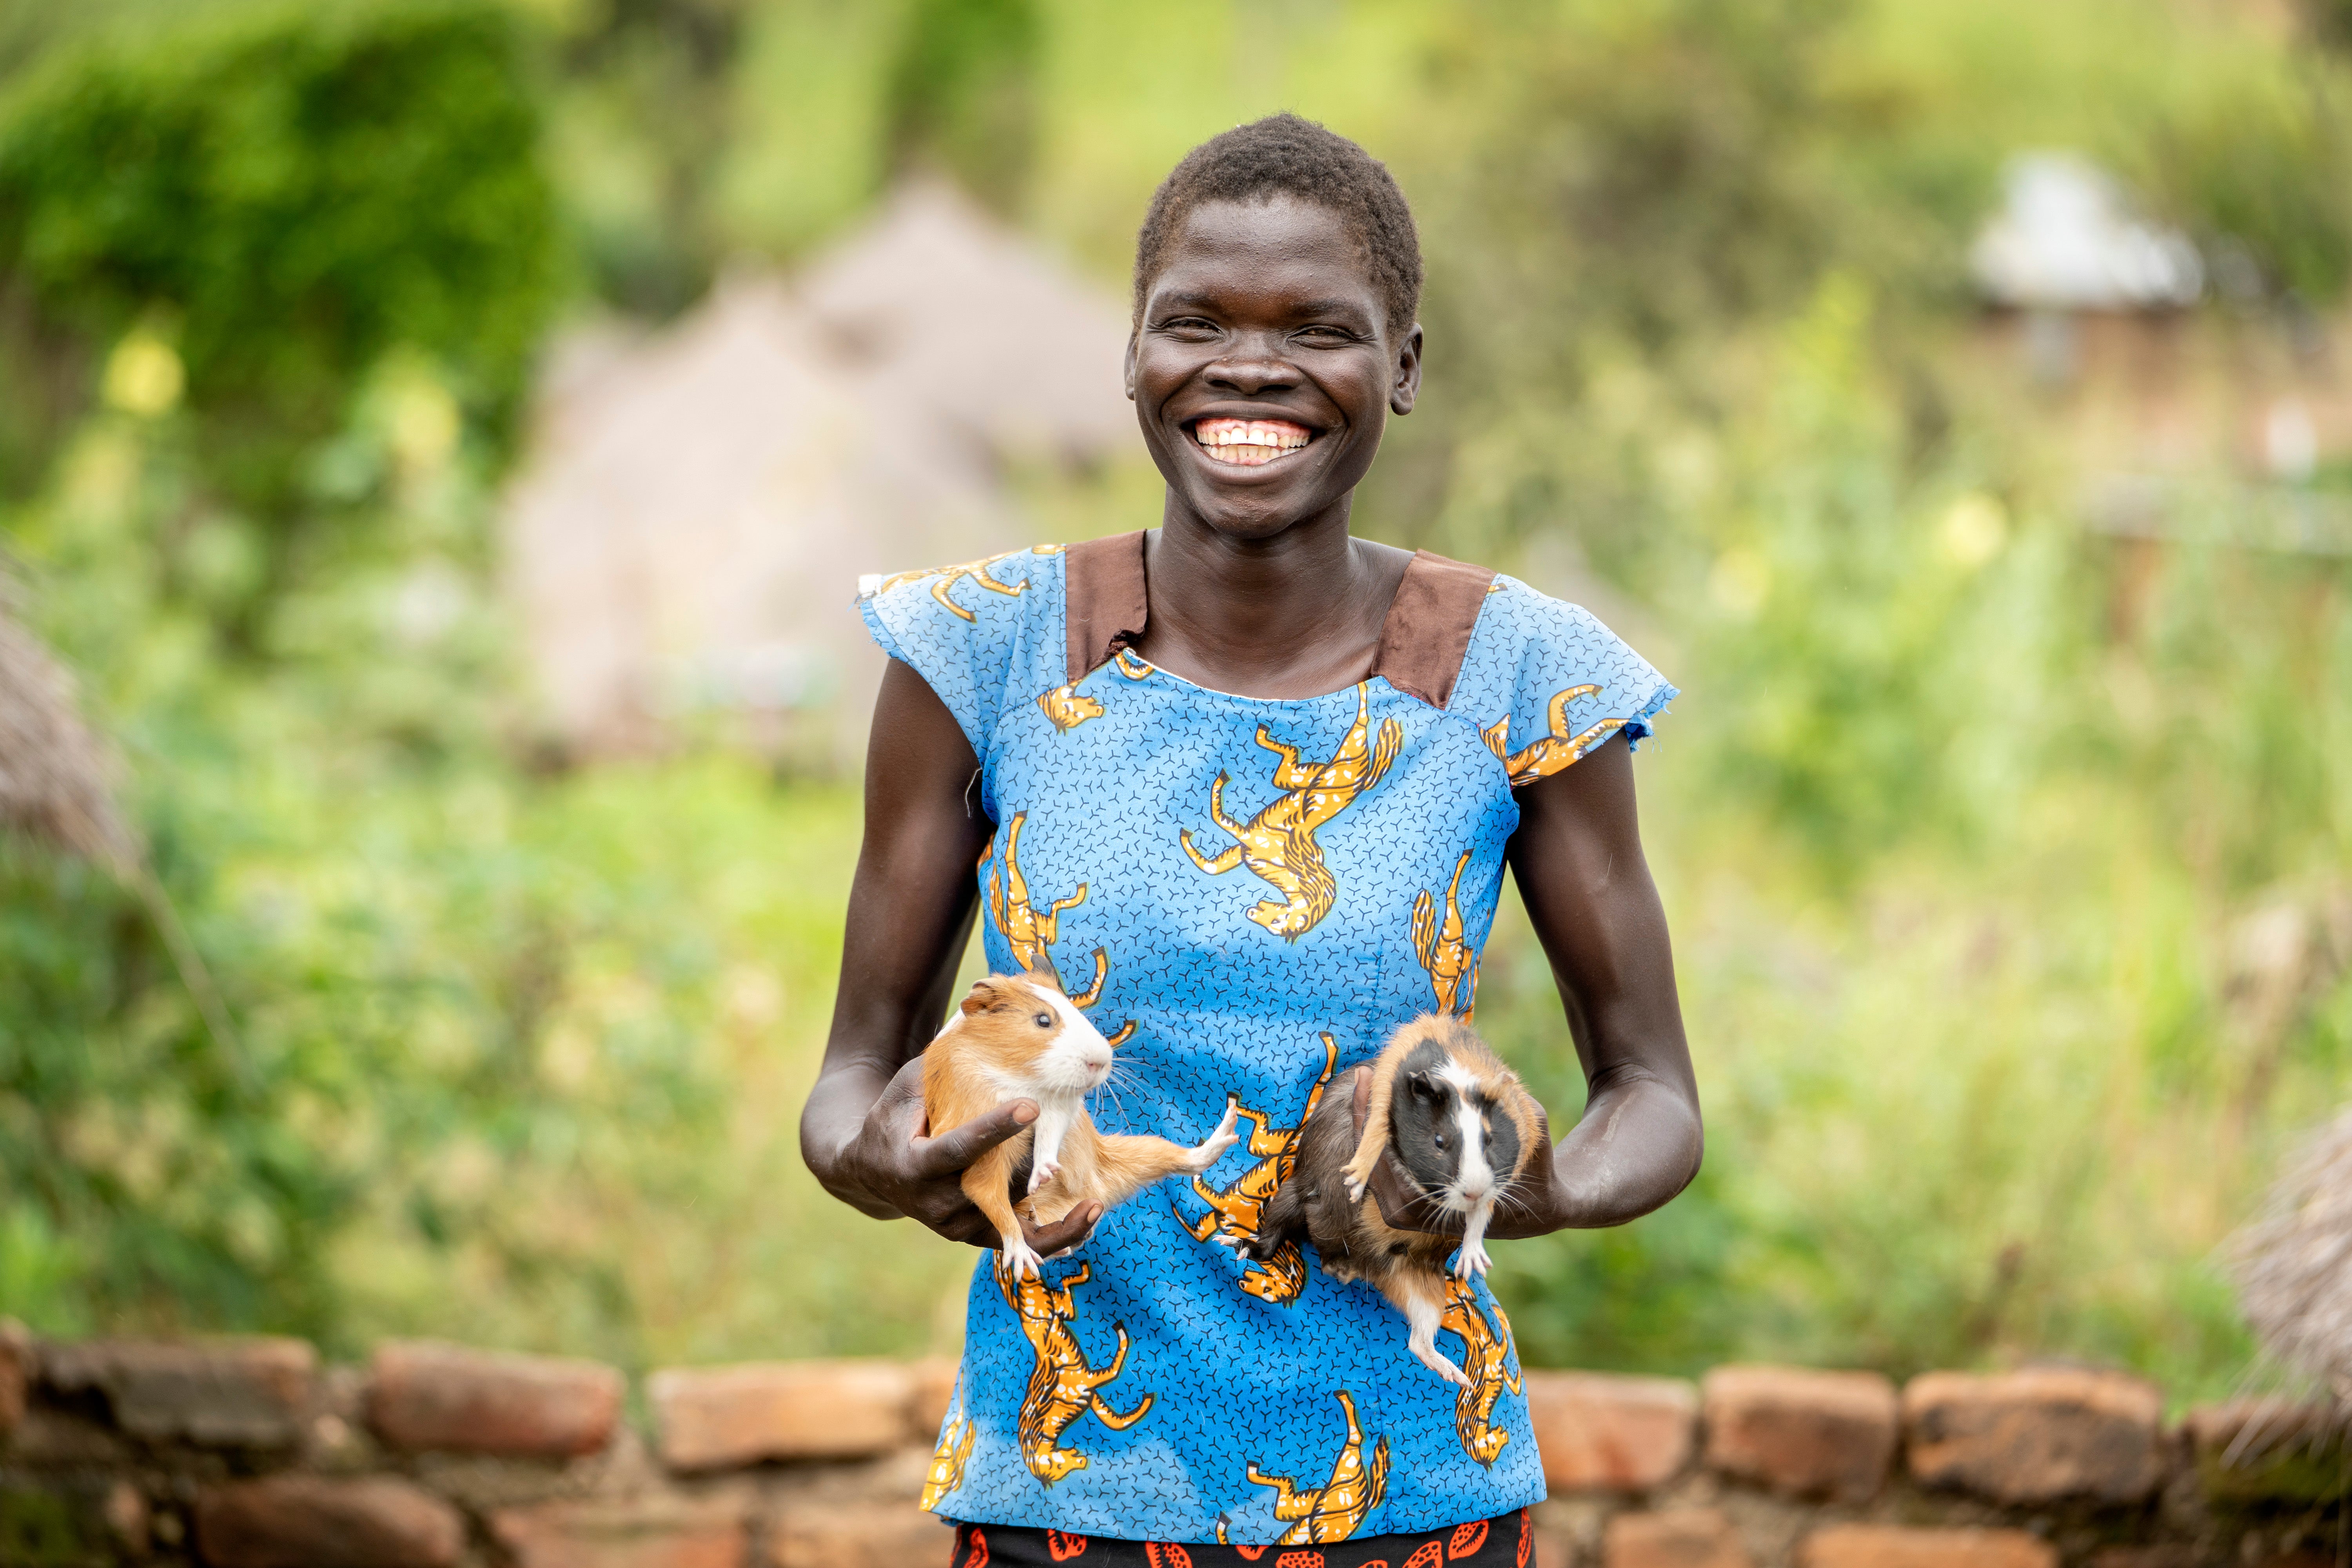 Mary showing some of the small animals that she raises in her compound. Photo Credit: UN Women/Jeroen Van Loon